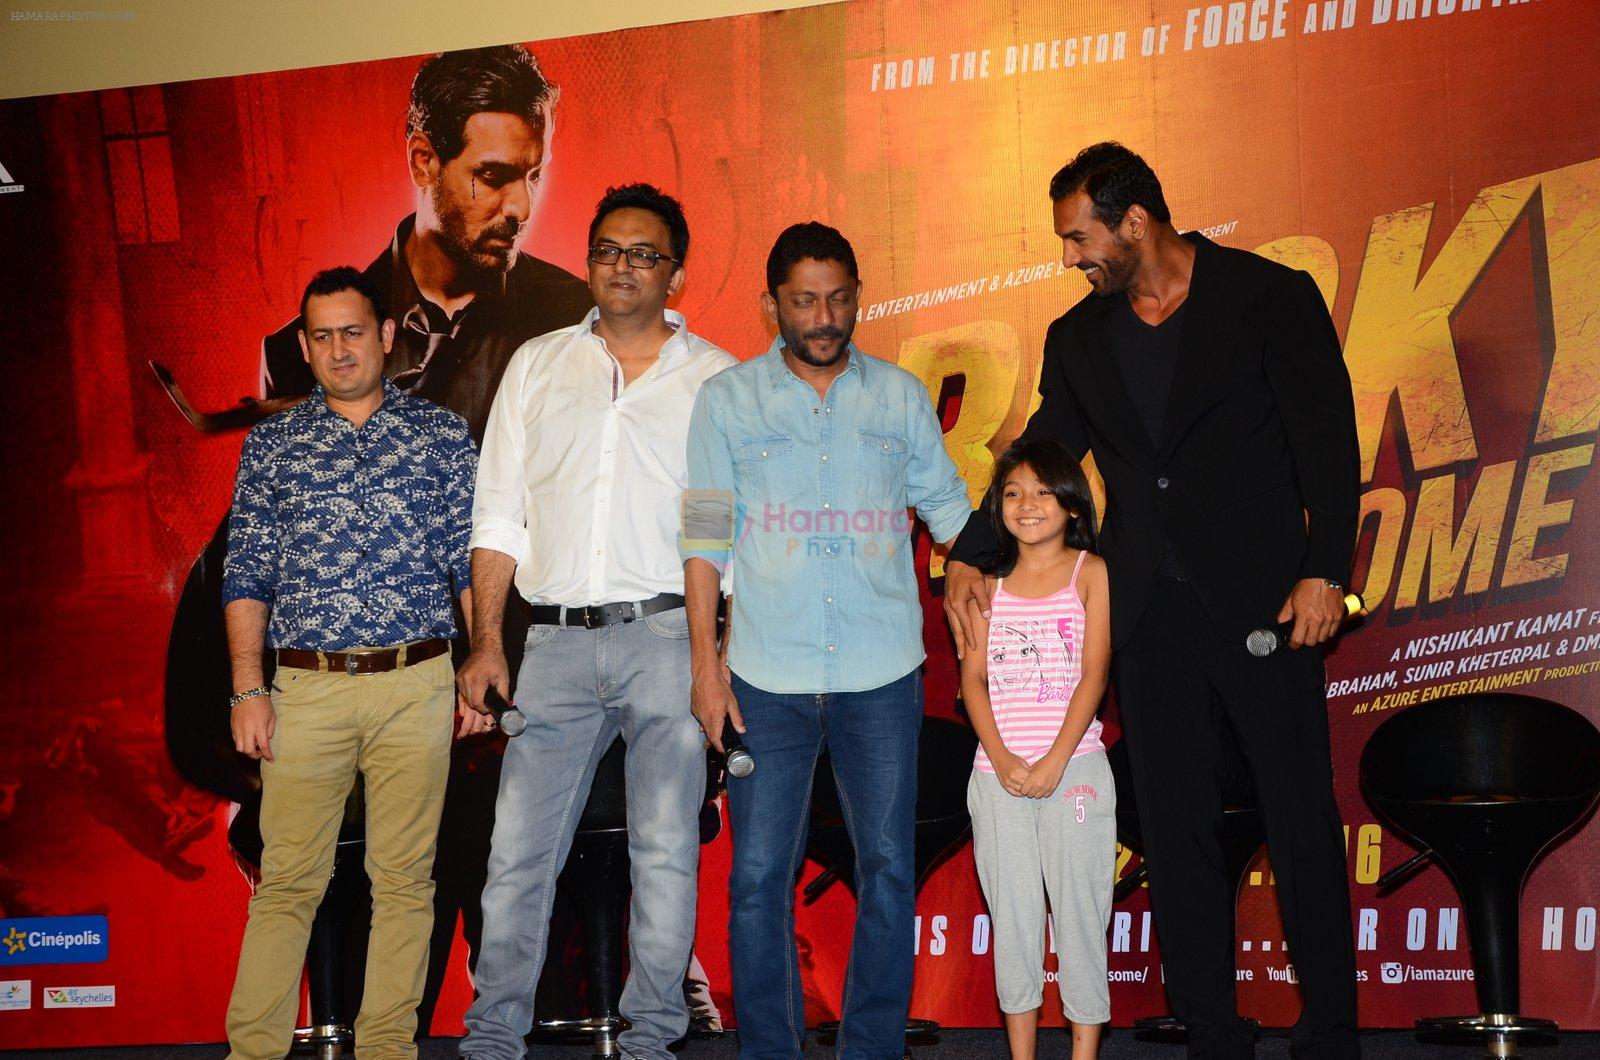 John Abraham, Nishikant Kamat at Rocky Handsome trailer launch on 3rd March 2016